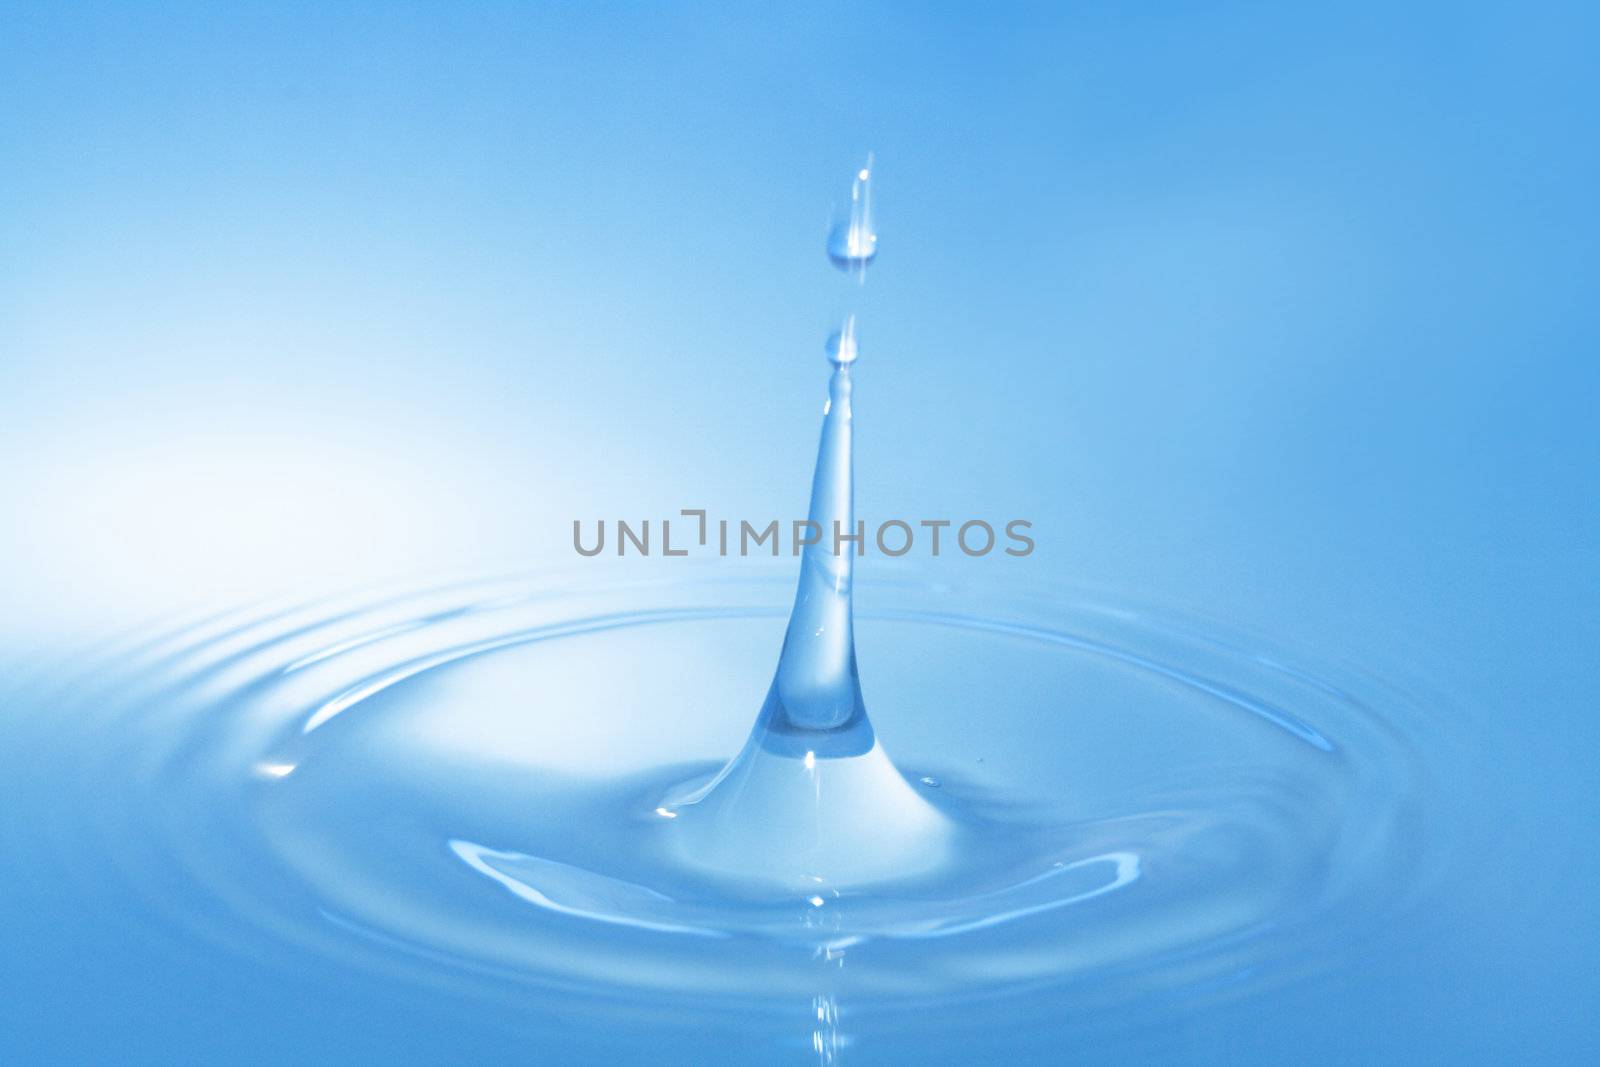 Splashing water abstract blue background with falling drop